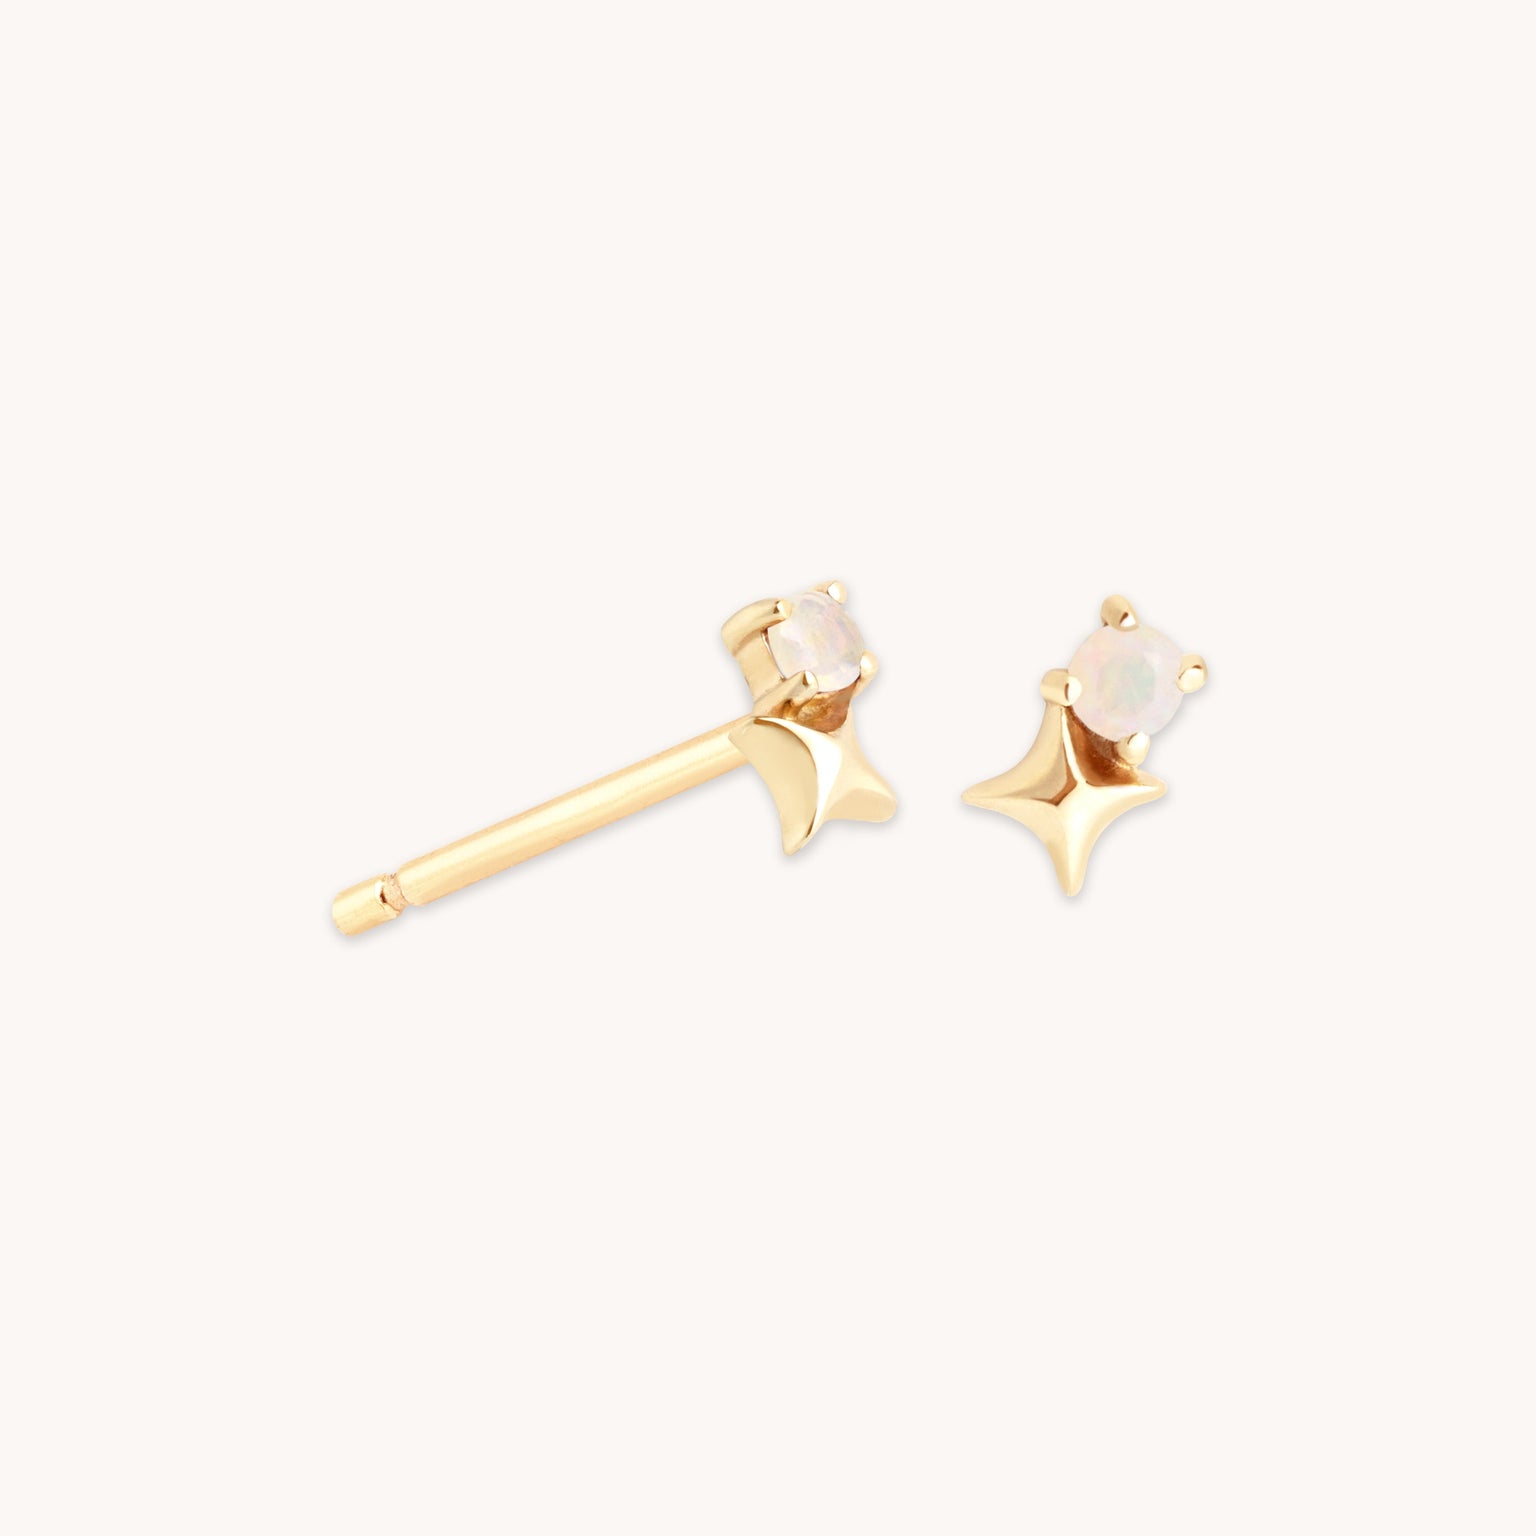 October Birthstone Earrings in Solid Gold